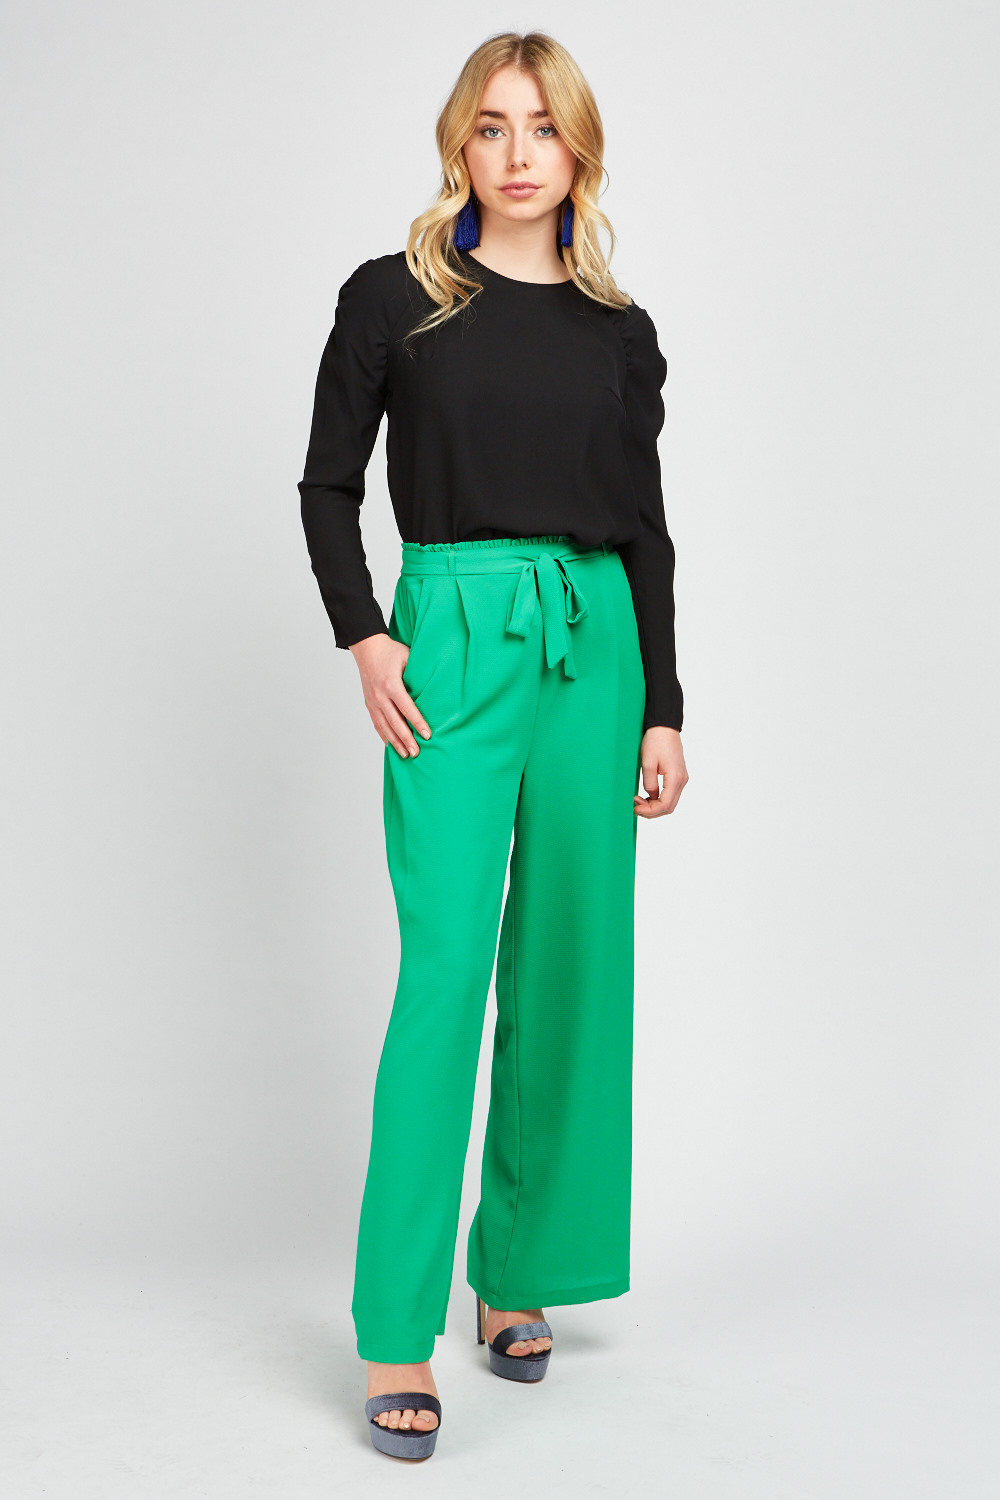 Green Wide Leg Trousers - Just $7